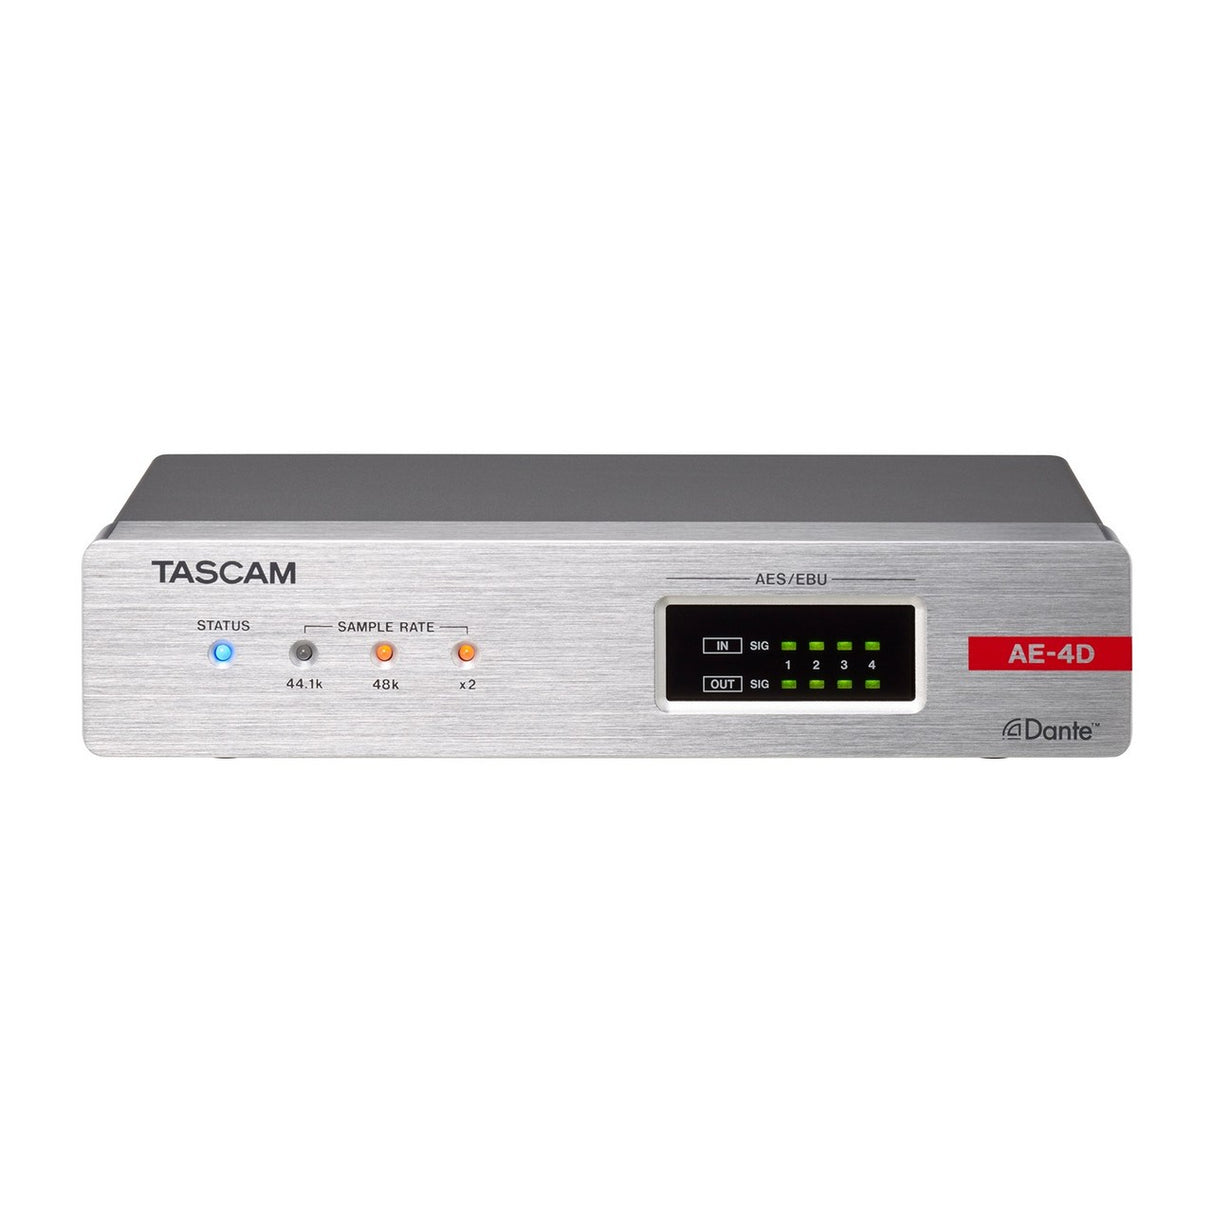 Tascam AE-4D 4 Channel AES/EBU Input/Output Dante Converter with Built-in DSP Mixer